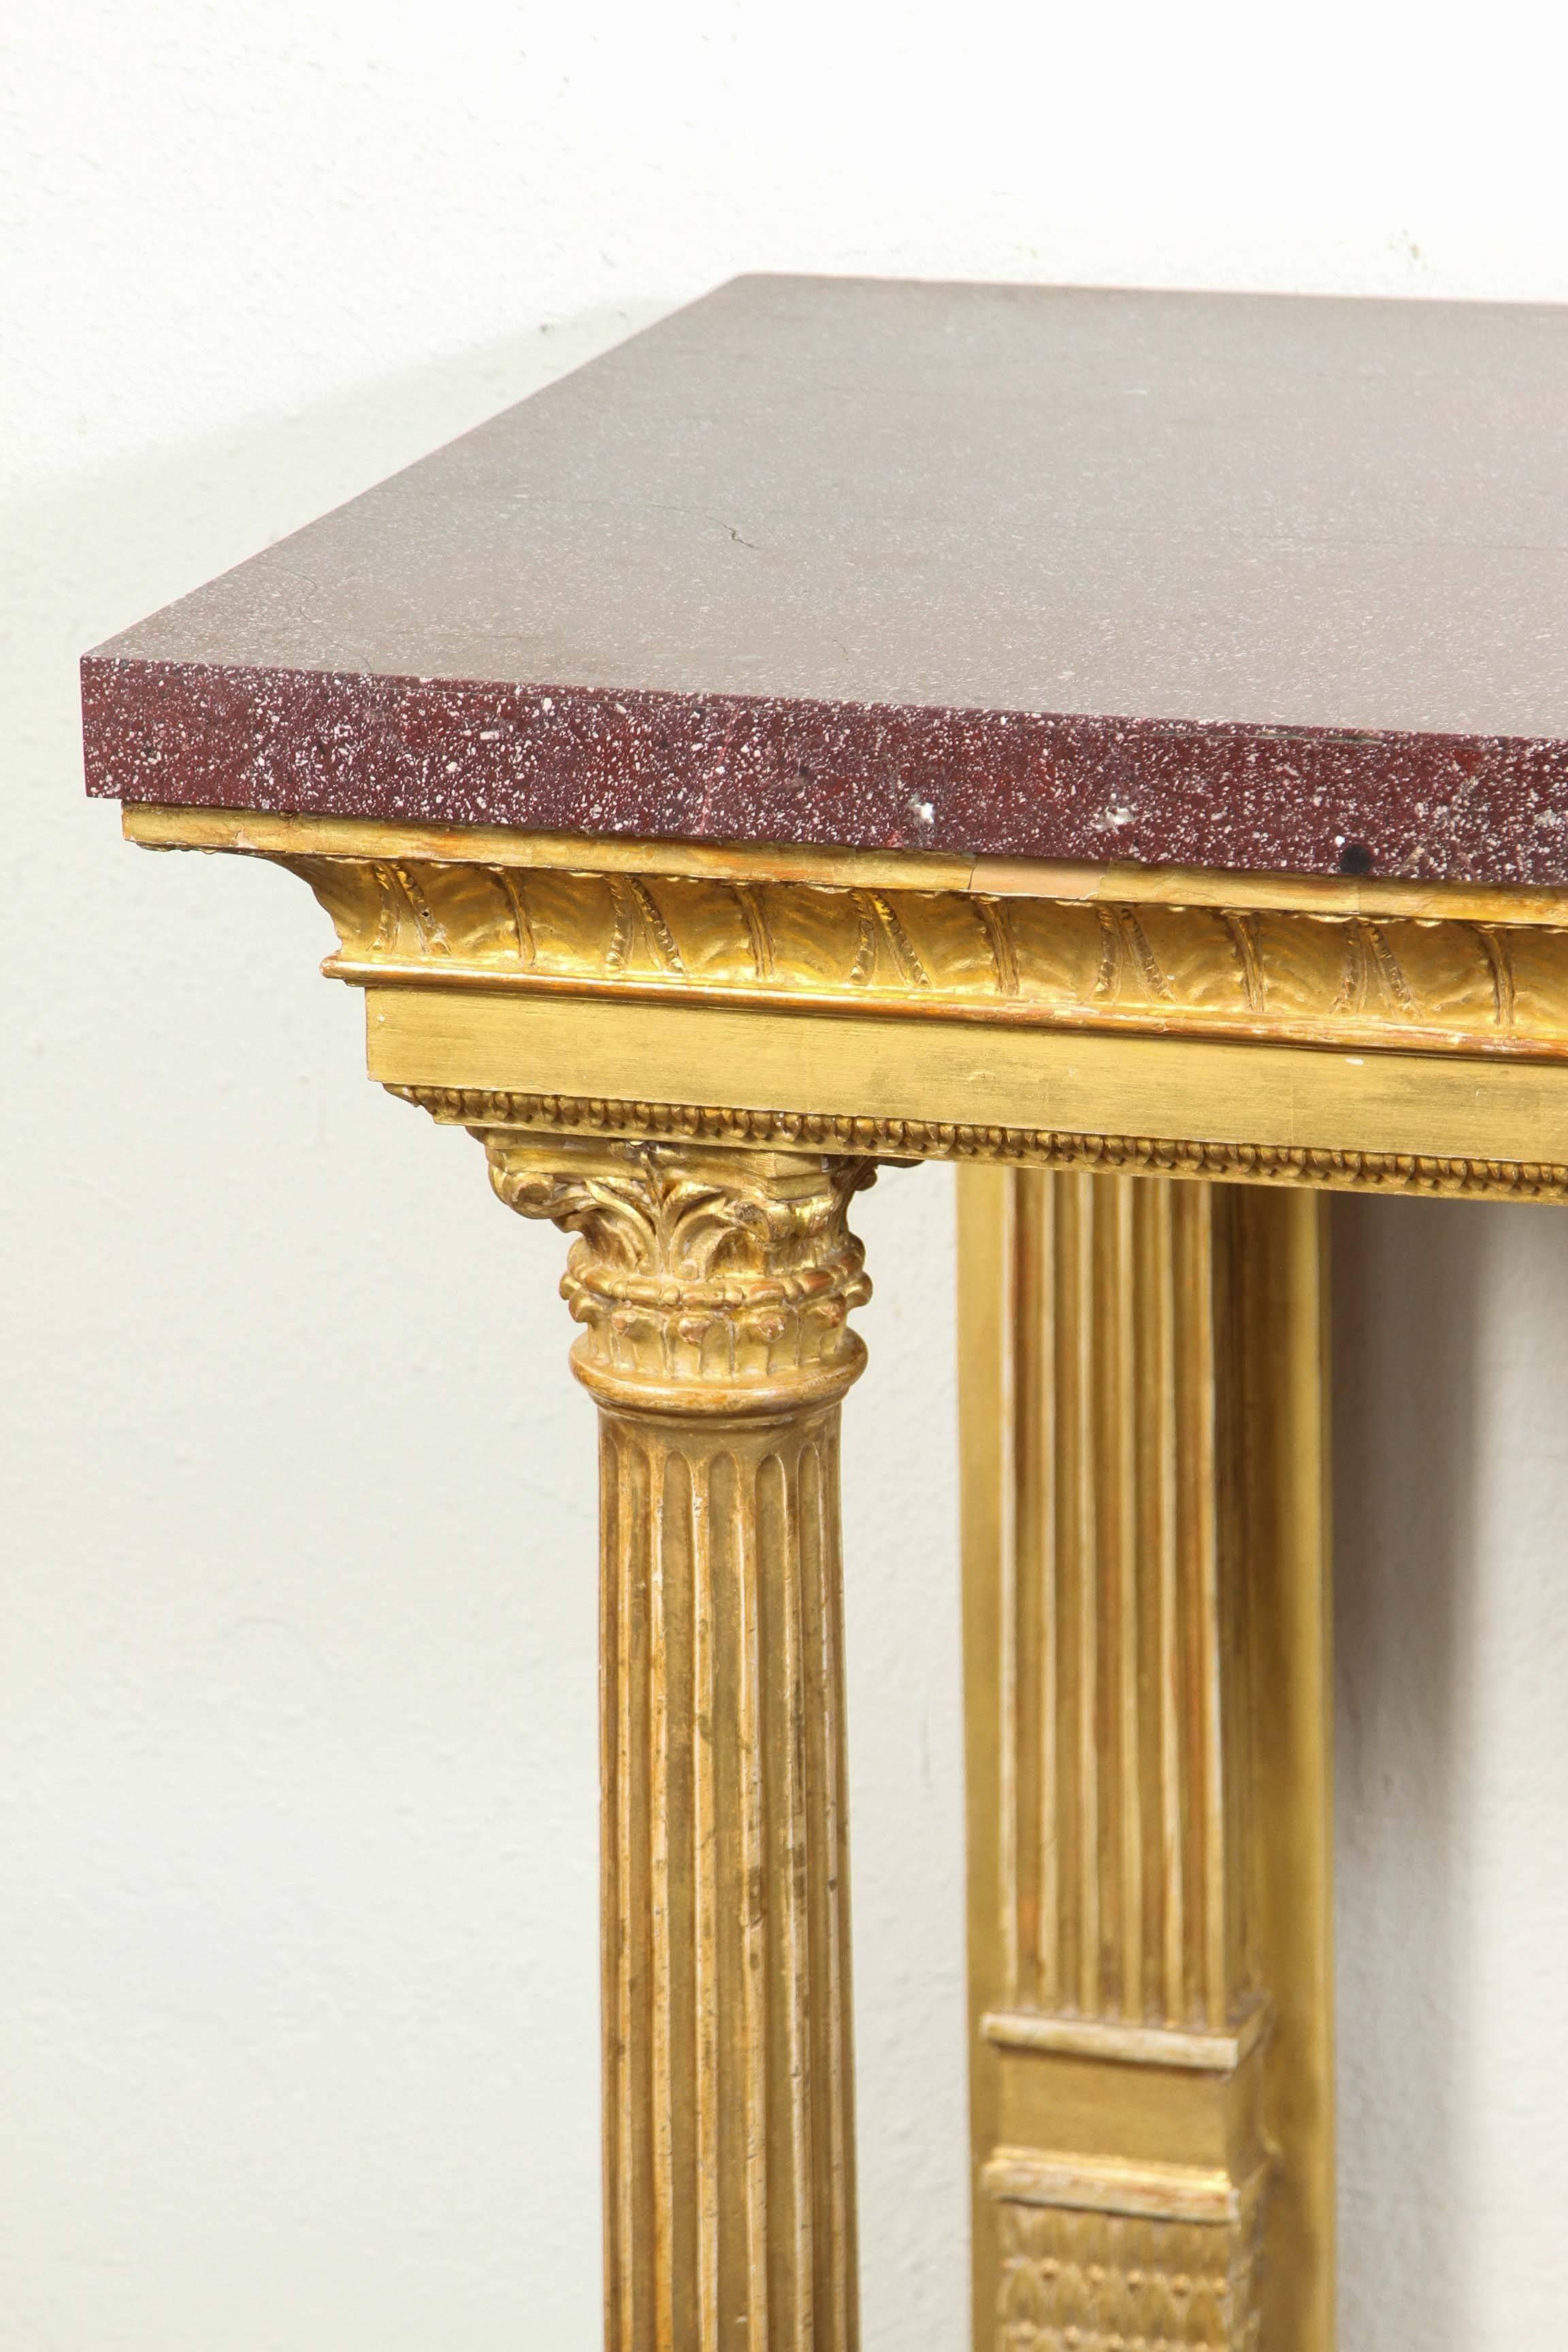 Pair of fine, hand-carved, circa 1830, gilt-wood, Florentine console tables. Porphyry veneered tops sit above a tiered, plinth supported by fluted, Corinthian columns. 